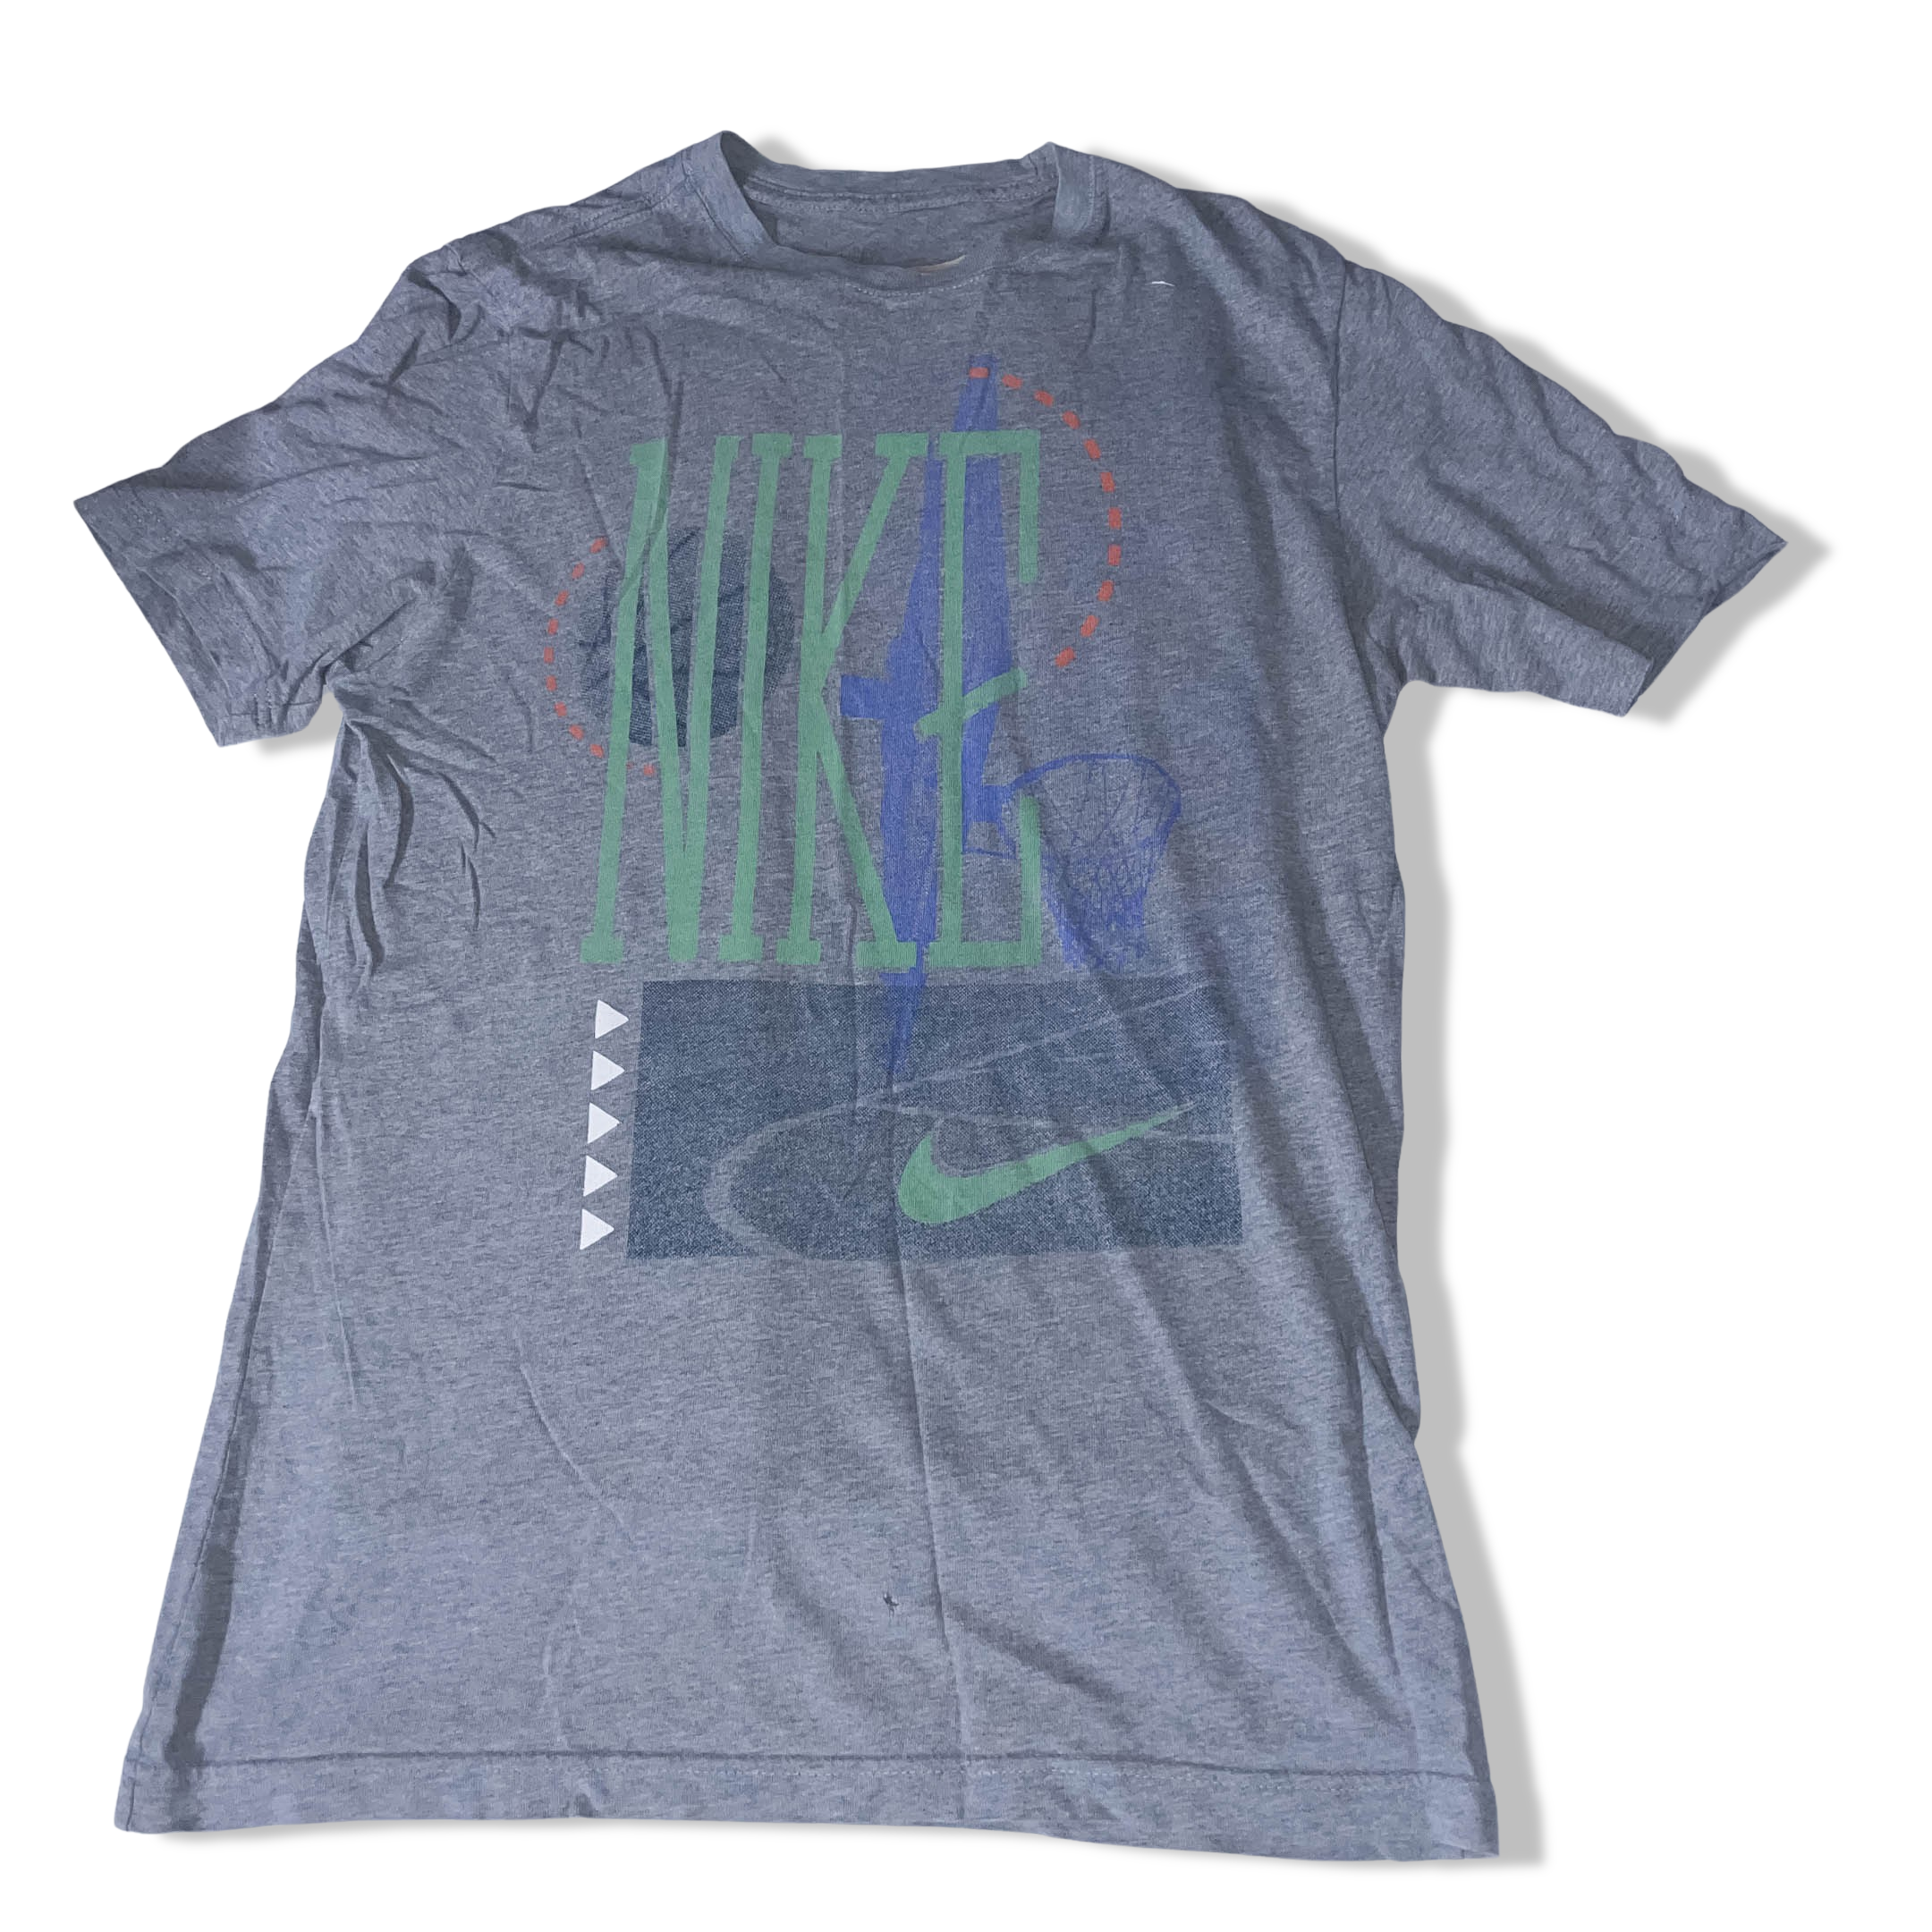 Vintage Gray Nike Basketball 90’s Neon Spell Out T-Shirt Mens Small S